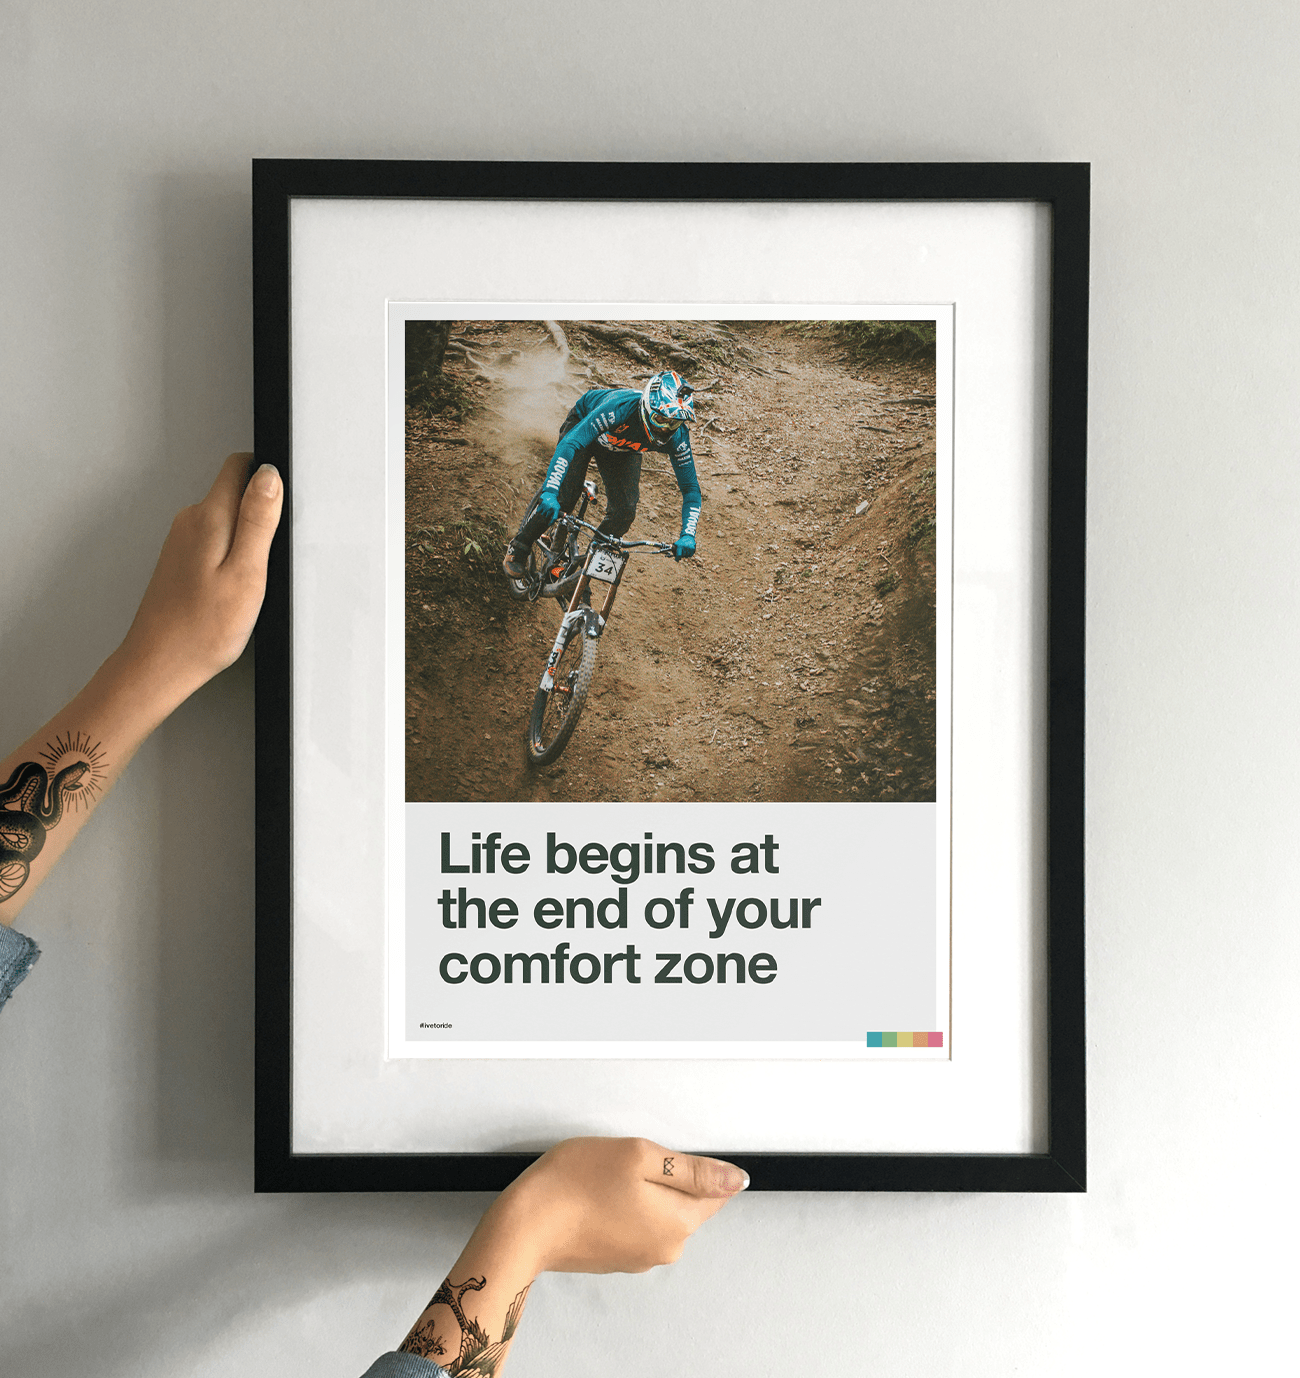 Life Begins at the End of Your Comfort Zone - Steve Peat Art Print